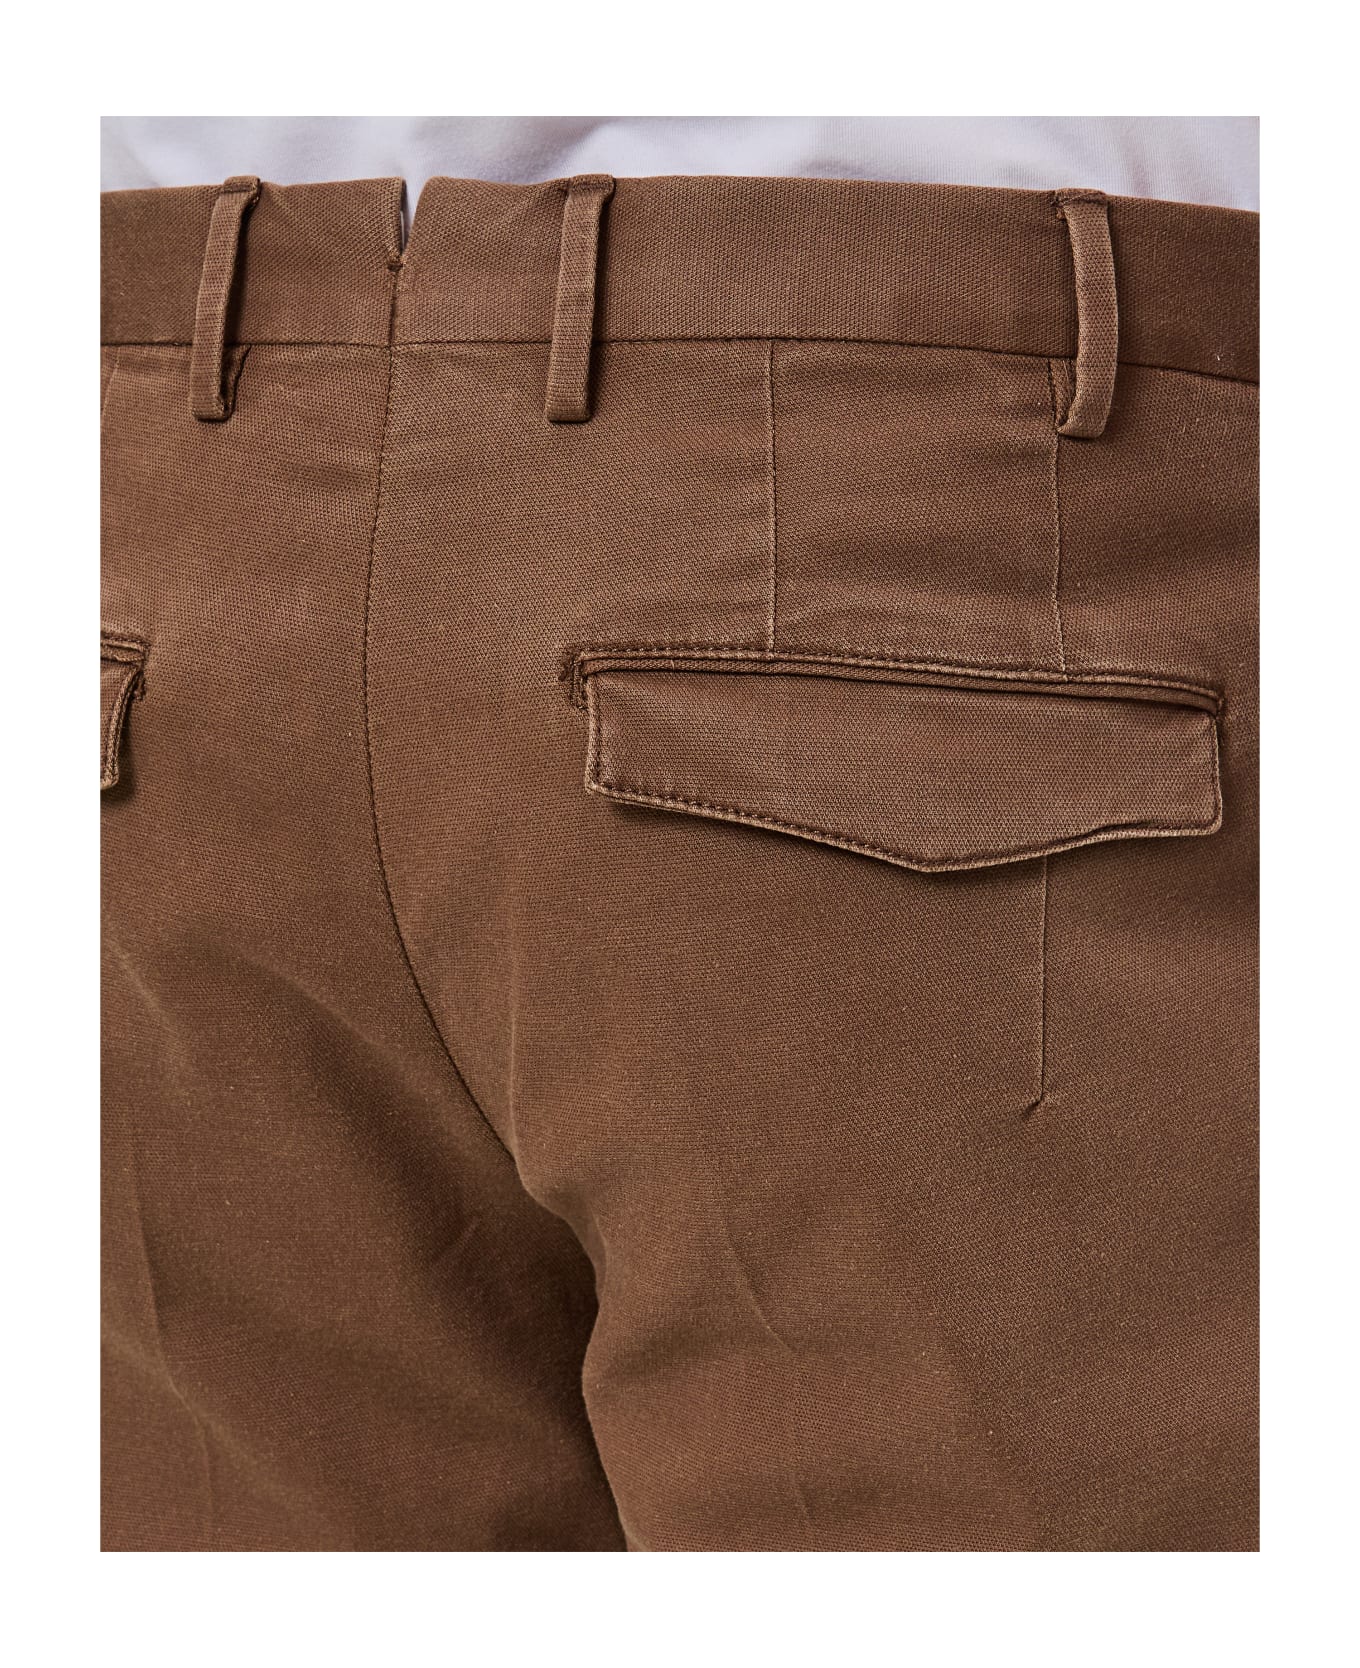 PT01 Cotton Trousers - Brown ボトムス